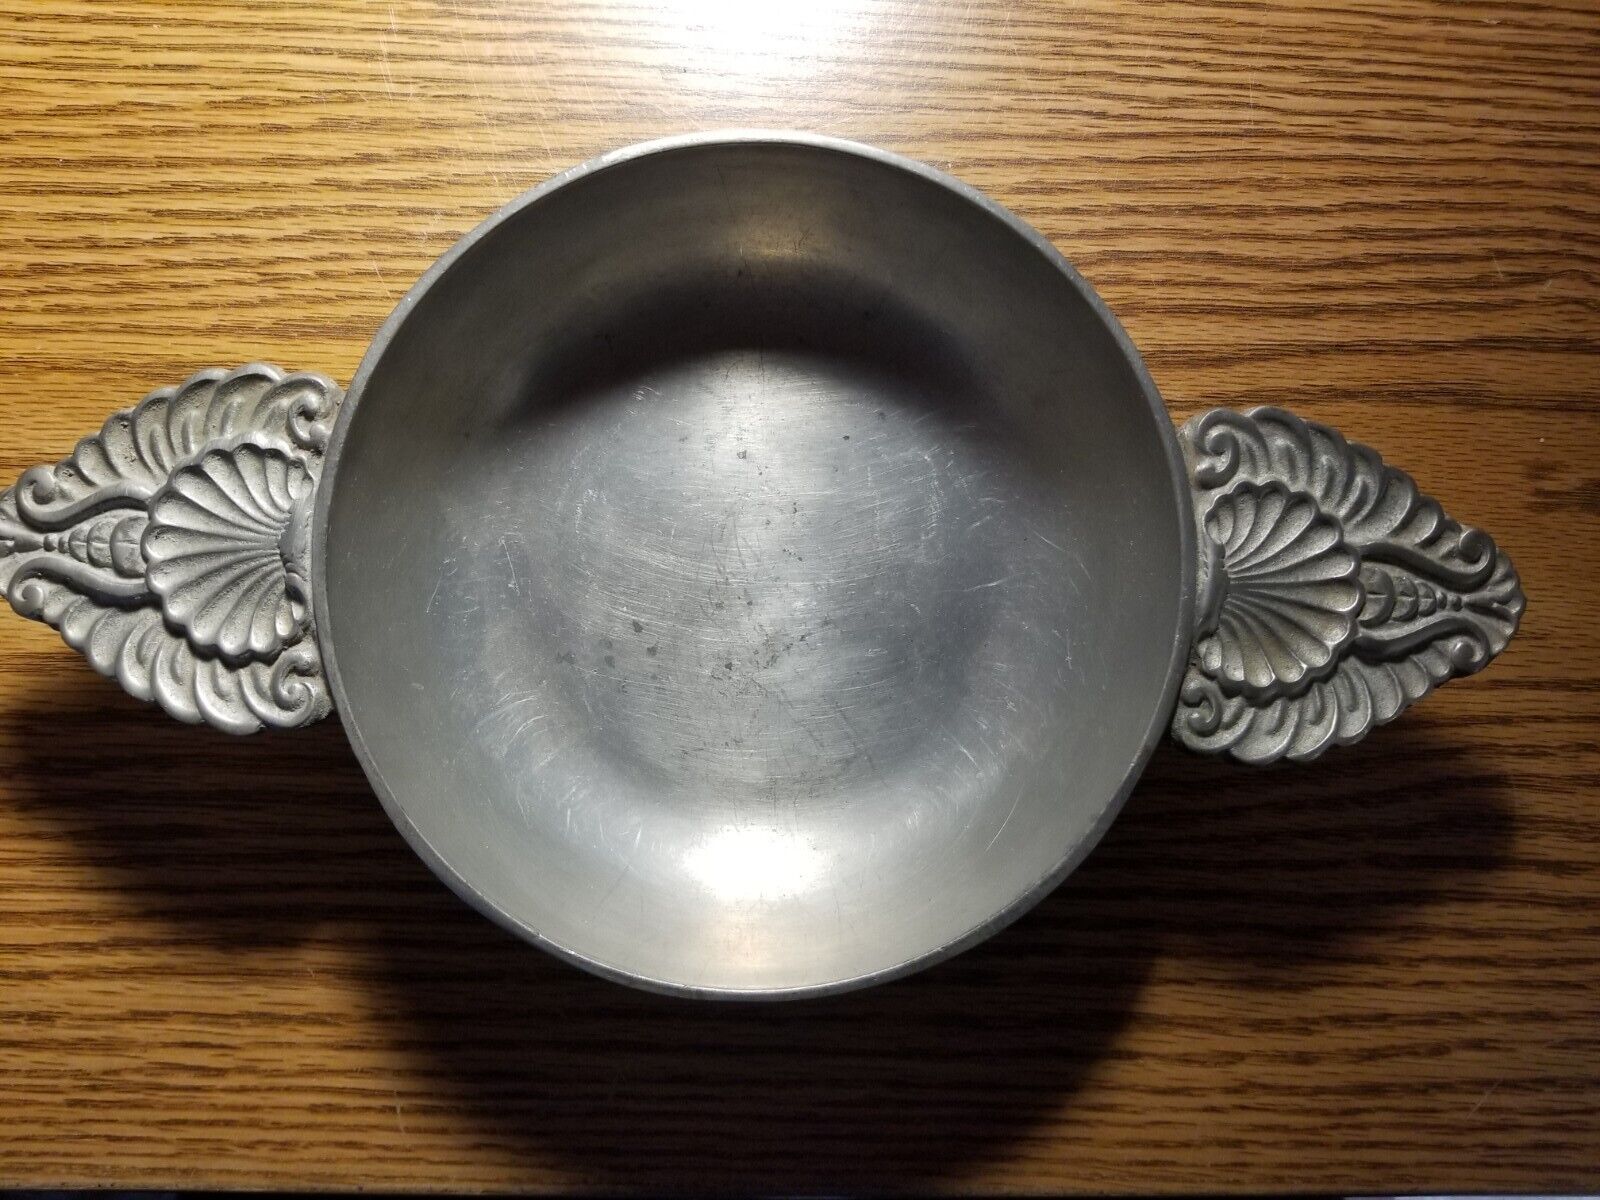 Antique Early French Louis XV Period Pewter Ecuelle Porringer 18th century